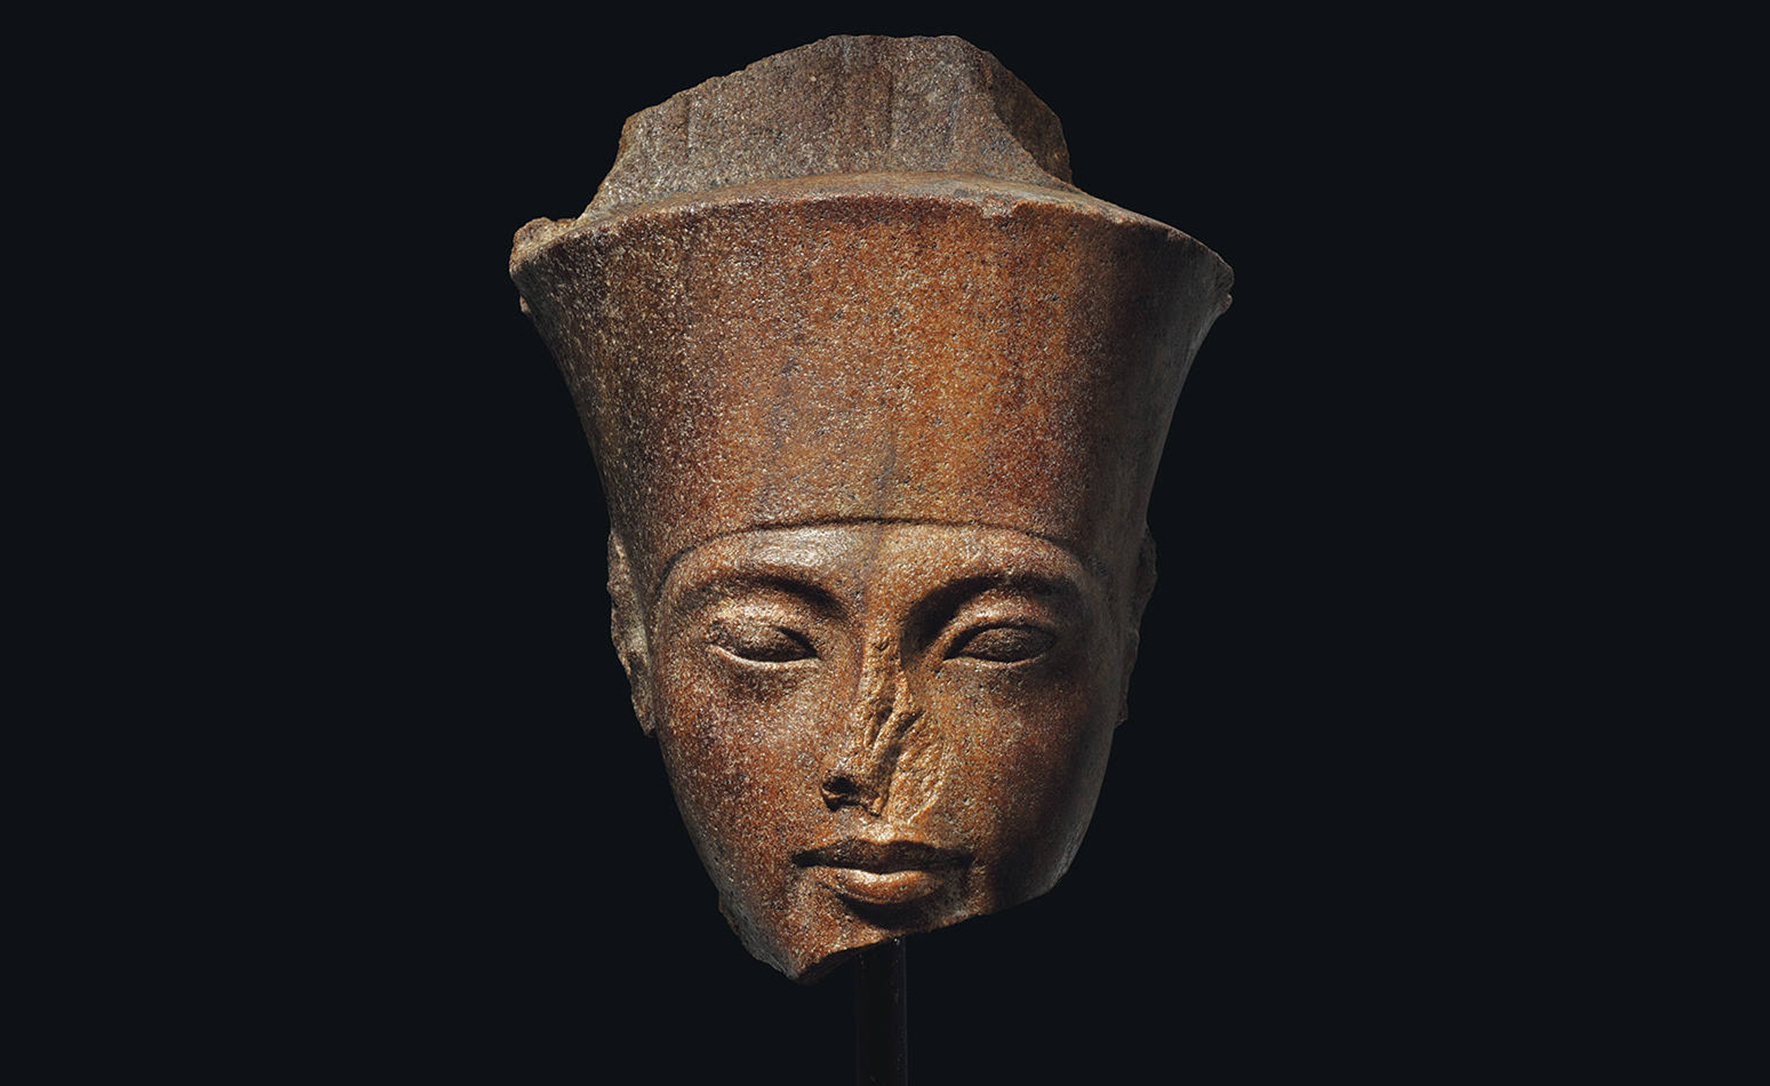 Egypt to Launch Investigation into British Auction House’s Possession of 3,000 Year-Old King Tutankhamun Bust